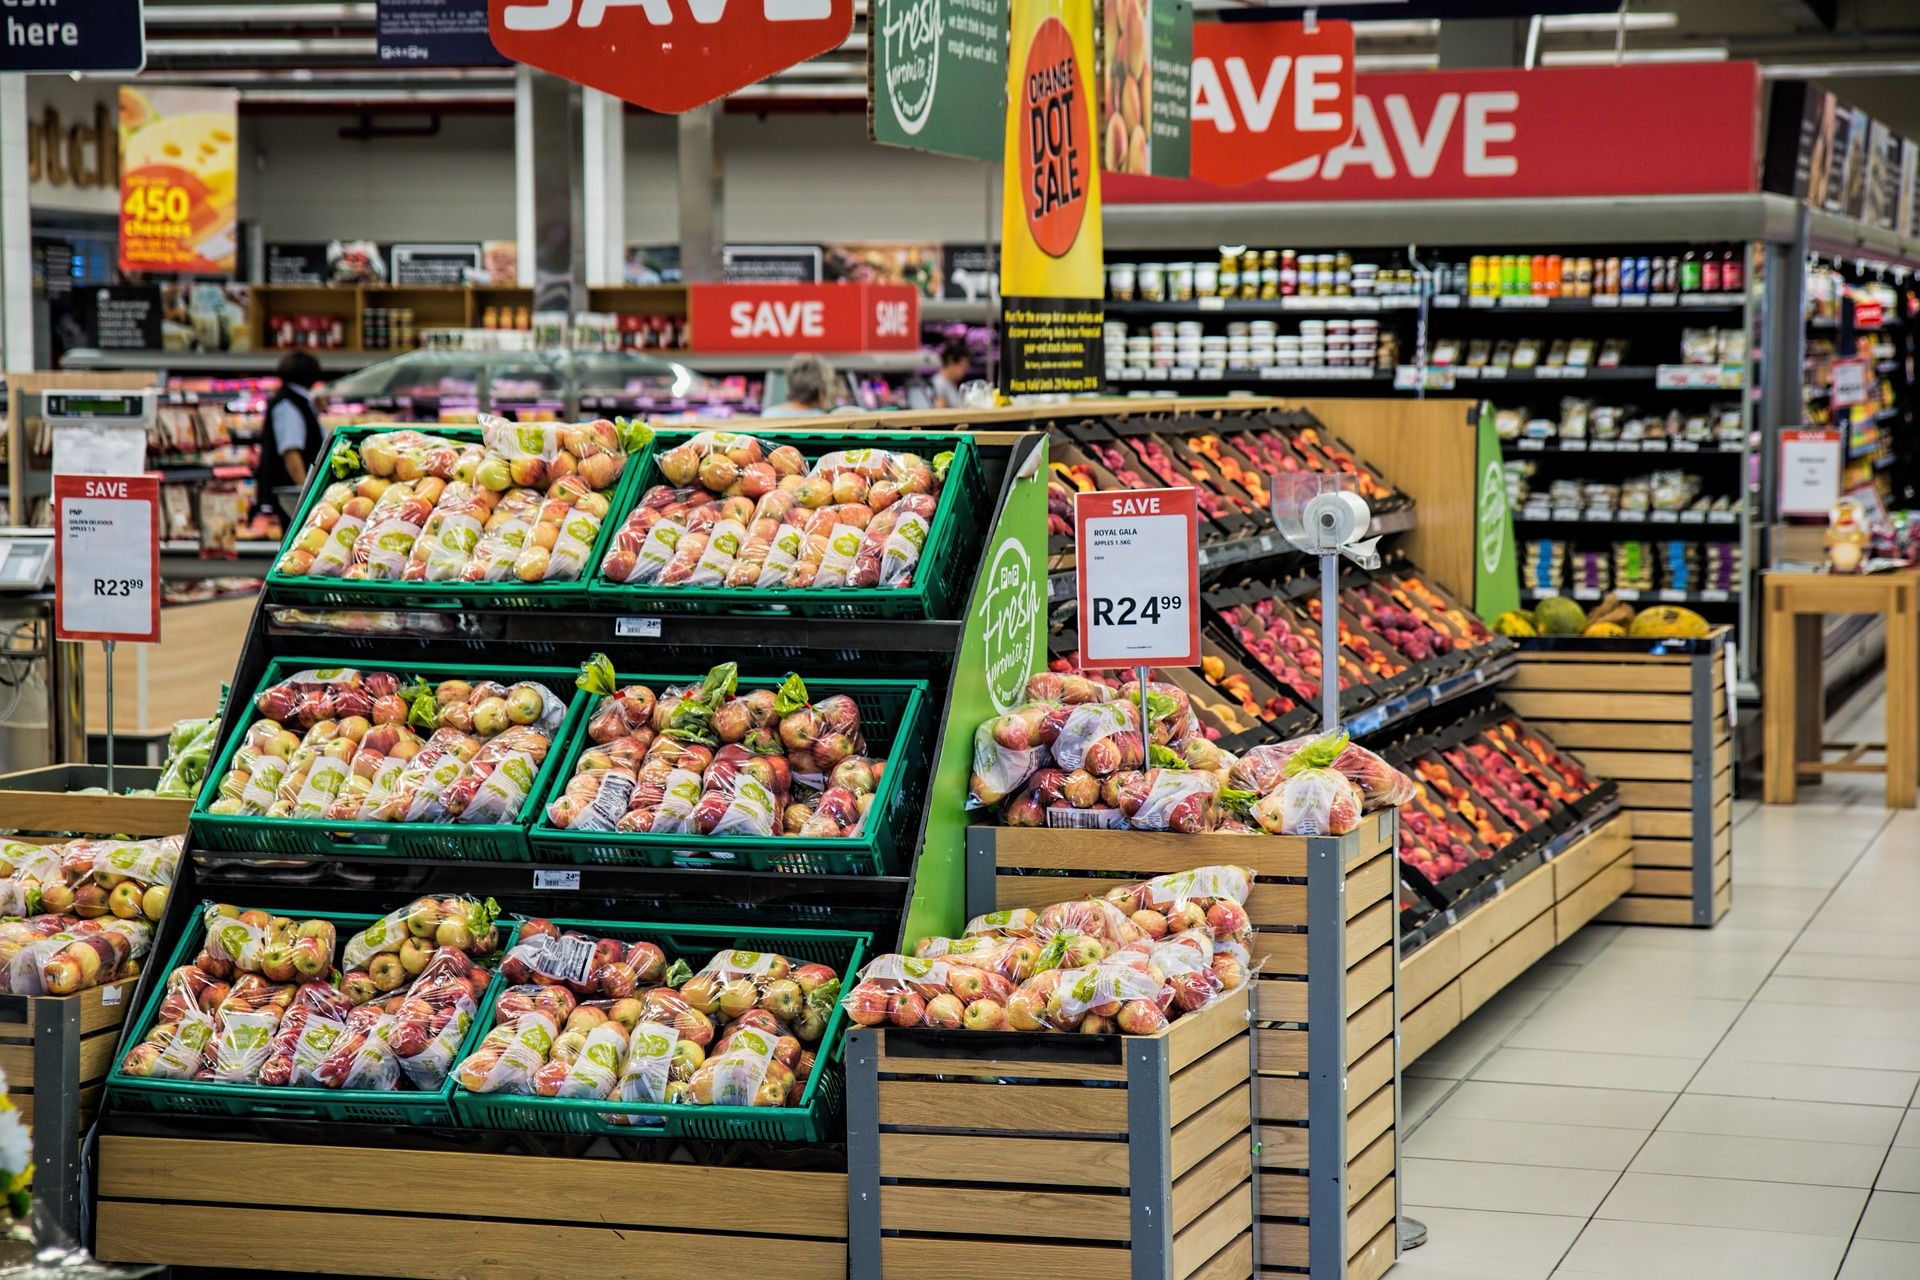 finding the best deals: this week’s cheapest supermarket in south africa